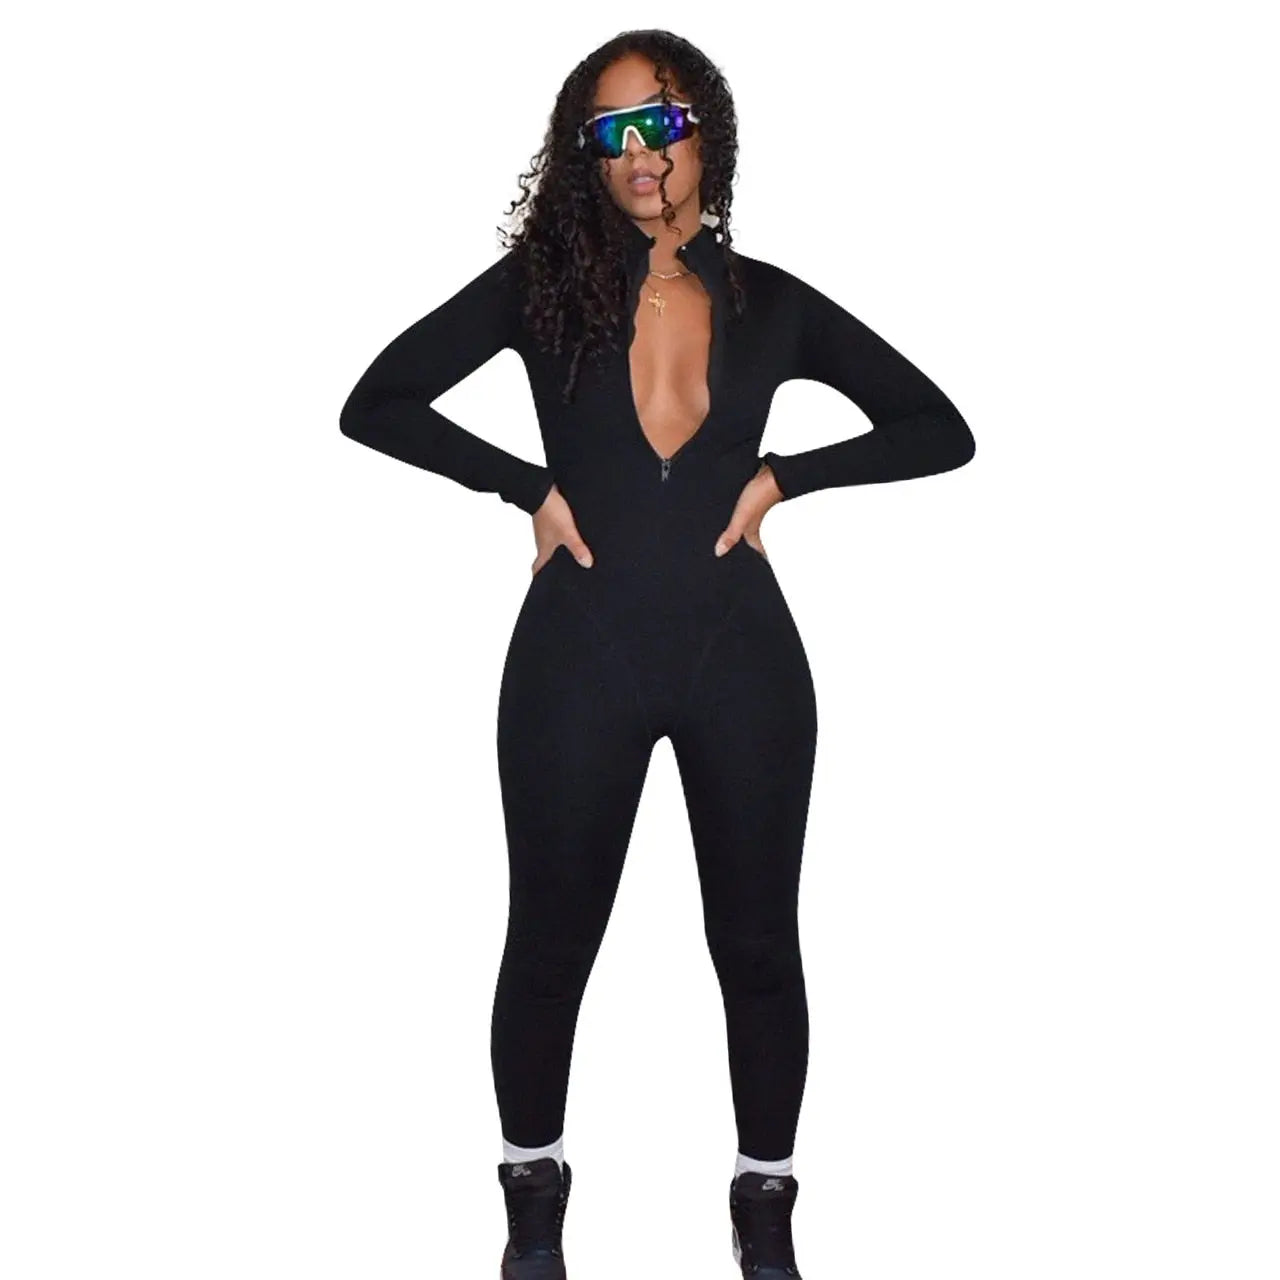 Echoine Zipper Long Sleeve Jumpsuit Green Gray Skinny Bodycon Sexy Rompers Autumn Rompers Party Clubwear Outfits Overalls Women.